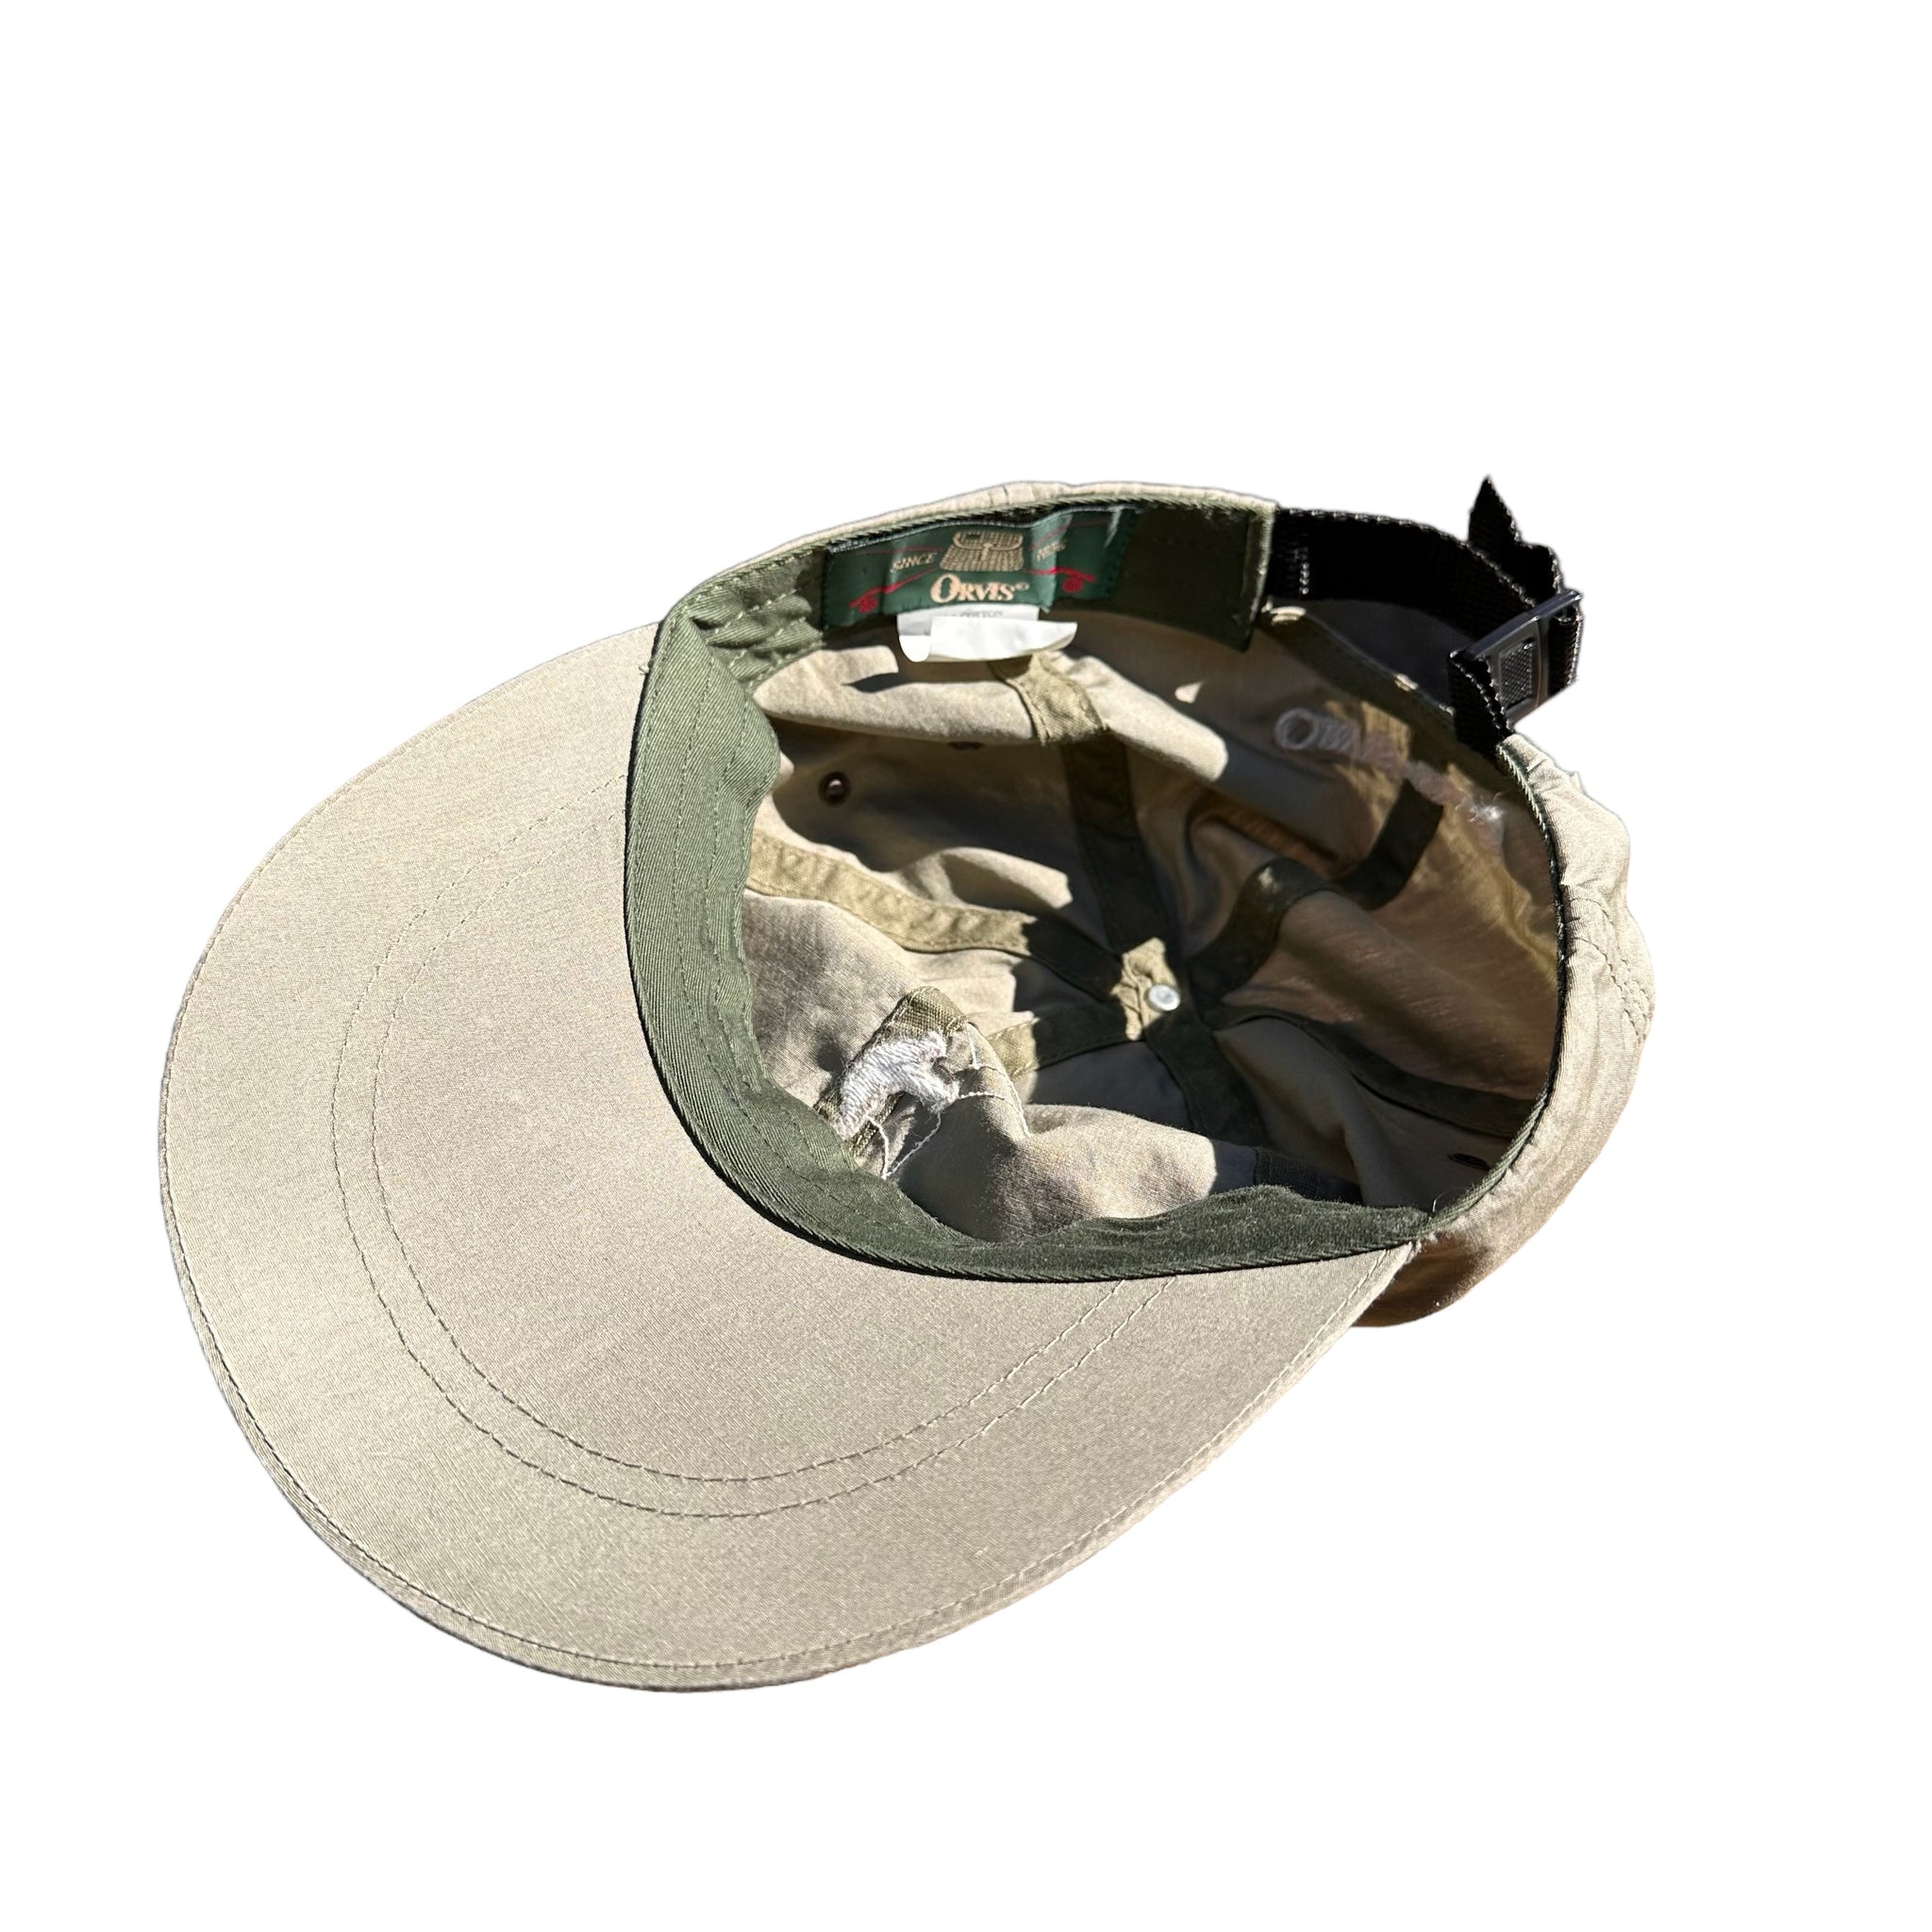 Orvis fly casting hat